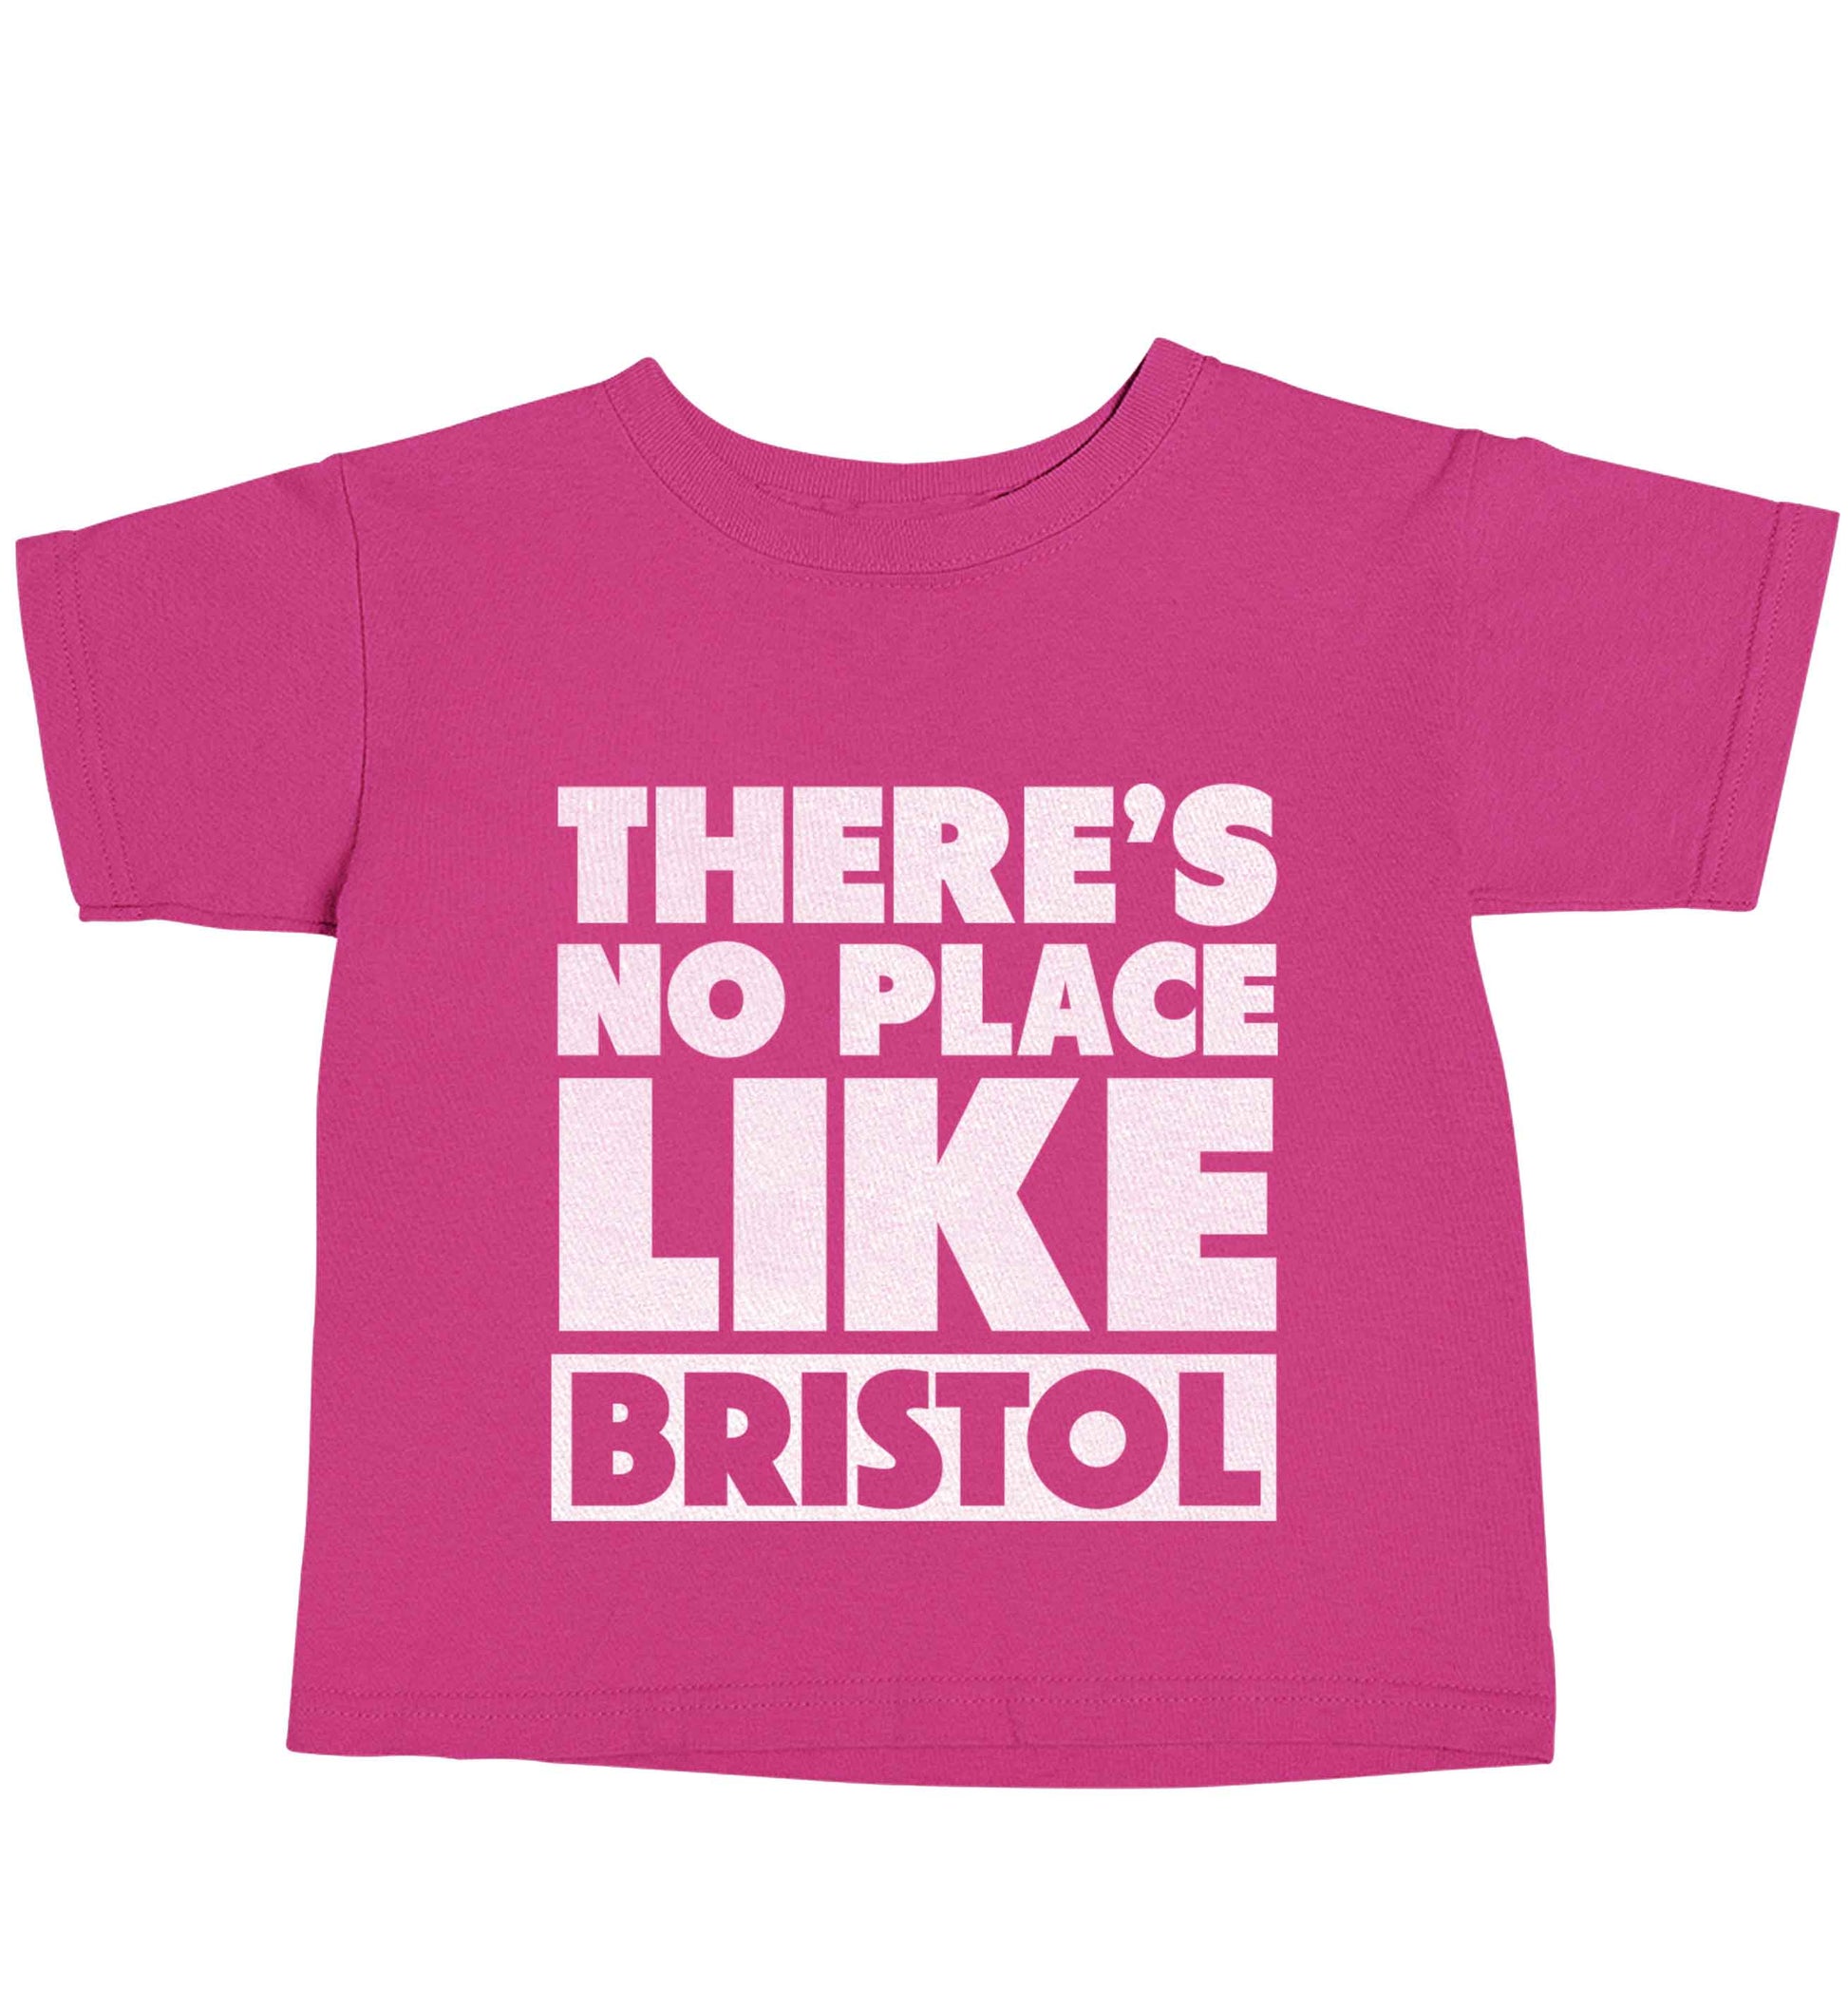 There's no place like Bristol pink baby toddler Tshirt 2 Years